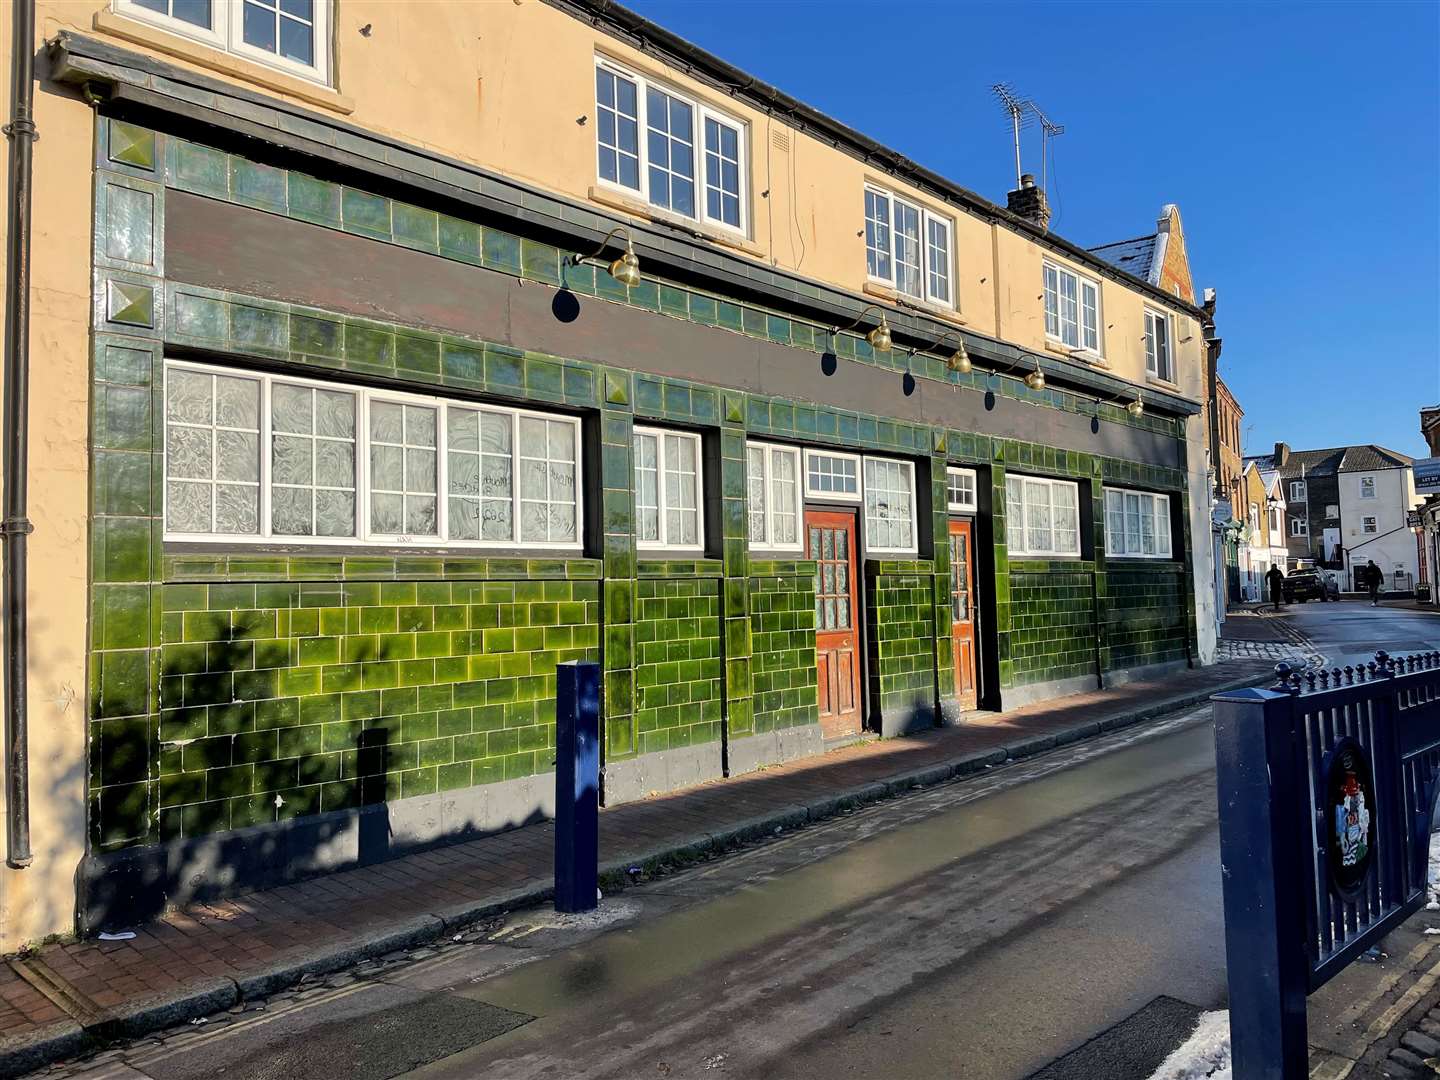 The former Manor Shades pub is up for let